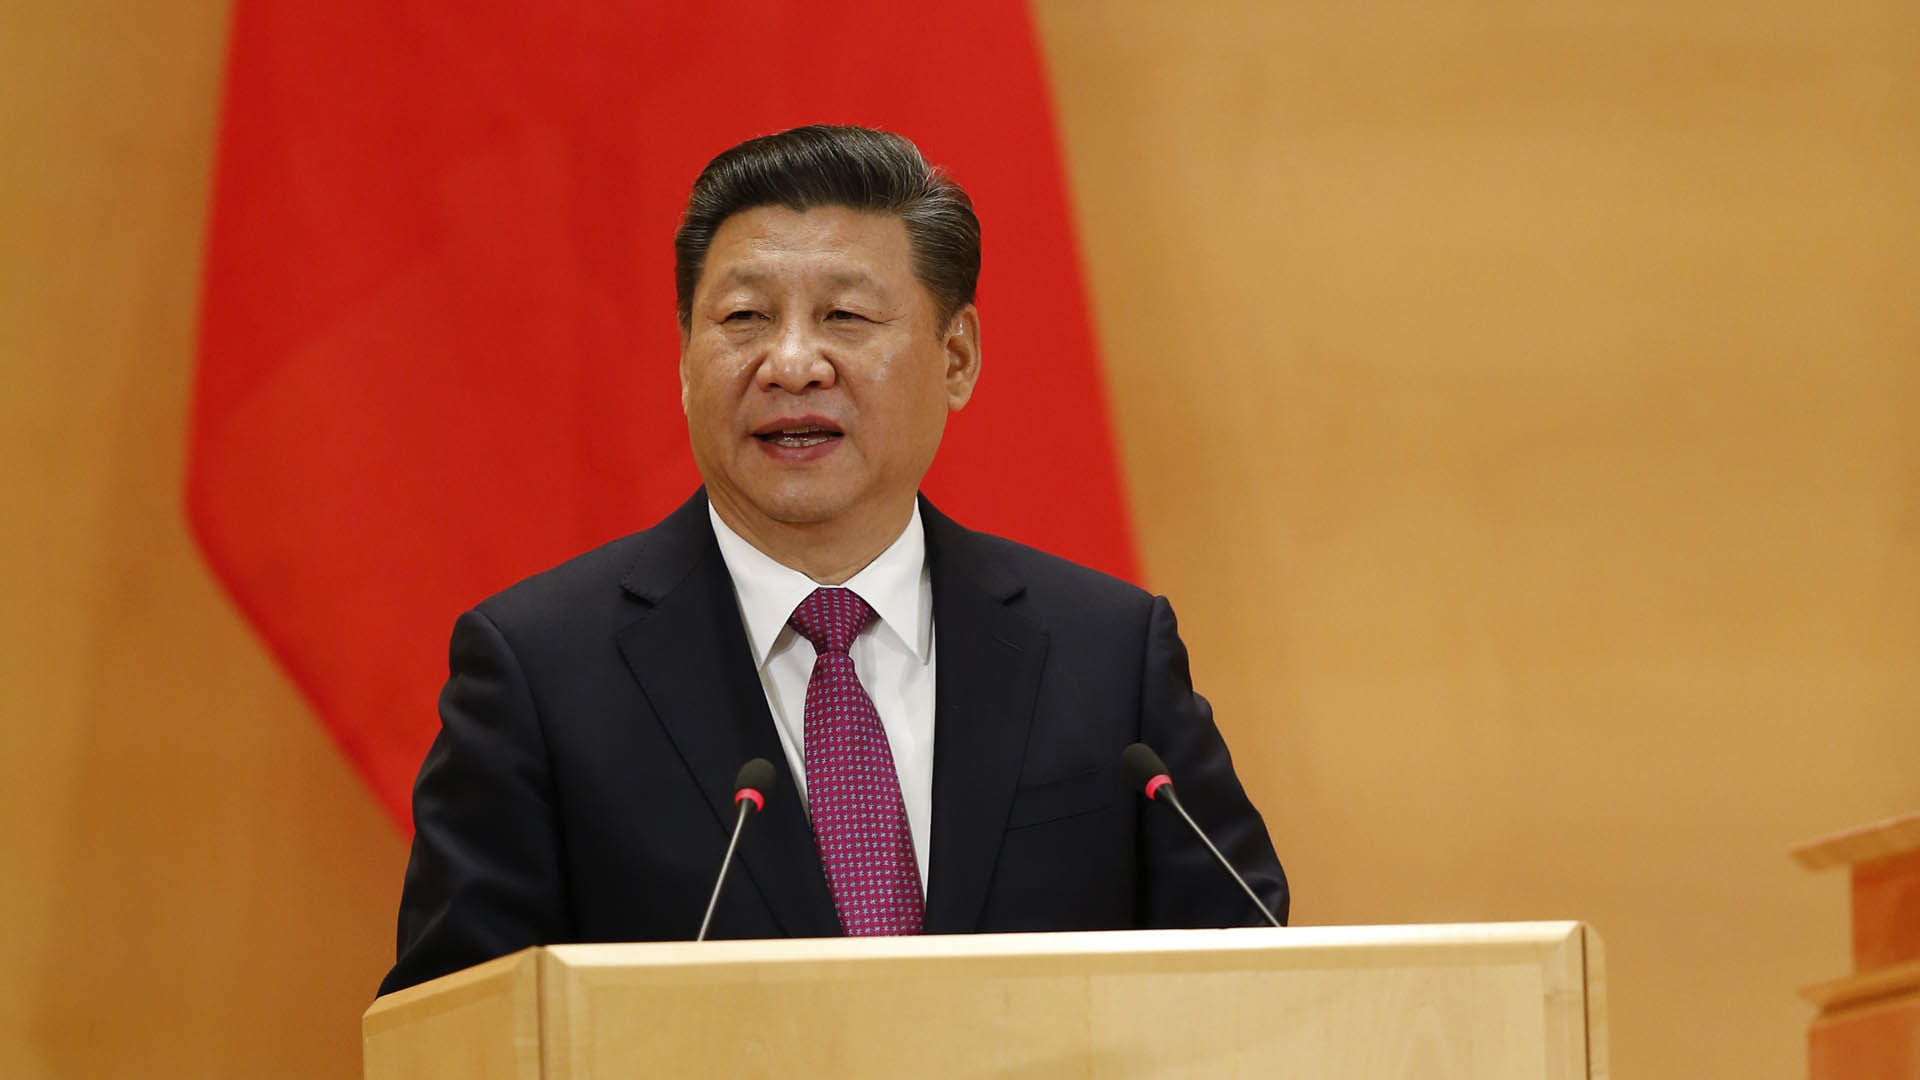 Chinese President Xi delivers a speech at the United Nations Office in Geneva